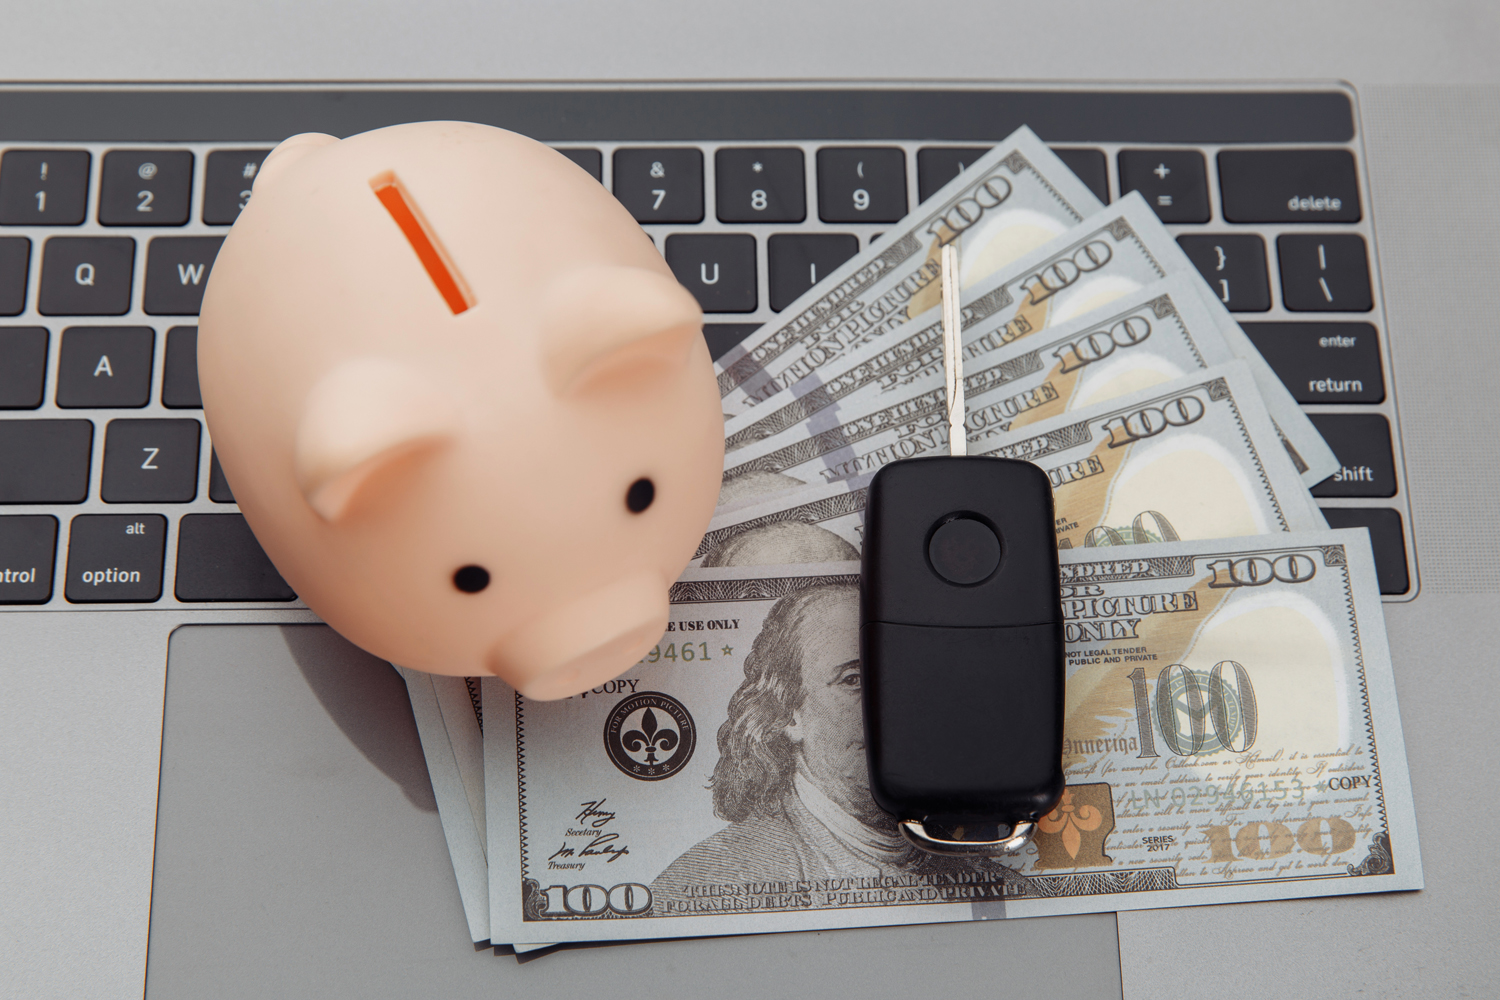 Piggybank on top of laptop with money and car remote